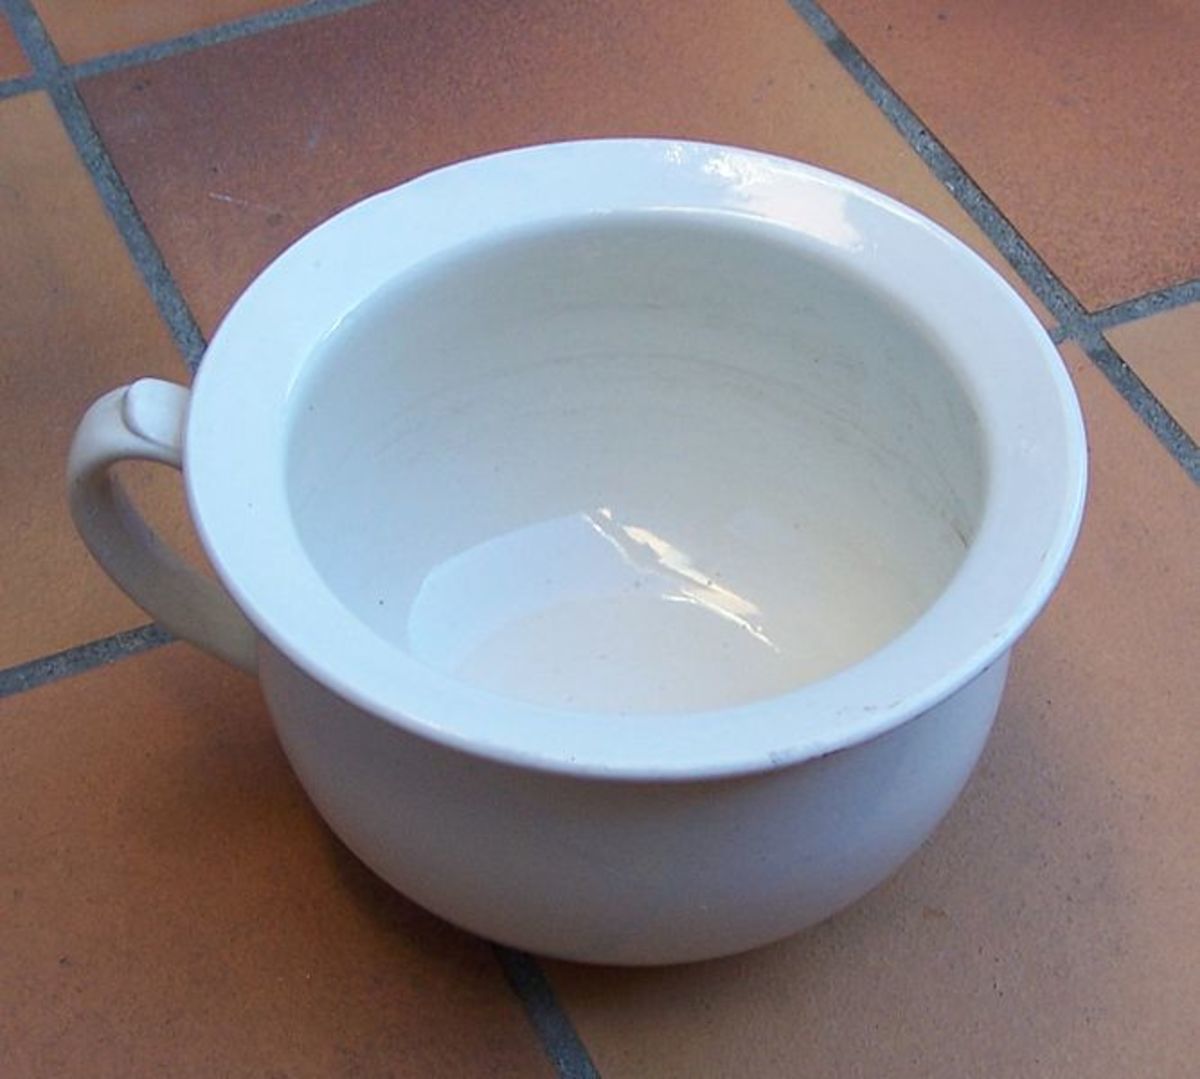 Old Fashioned Chamber Pot for overnight use.